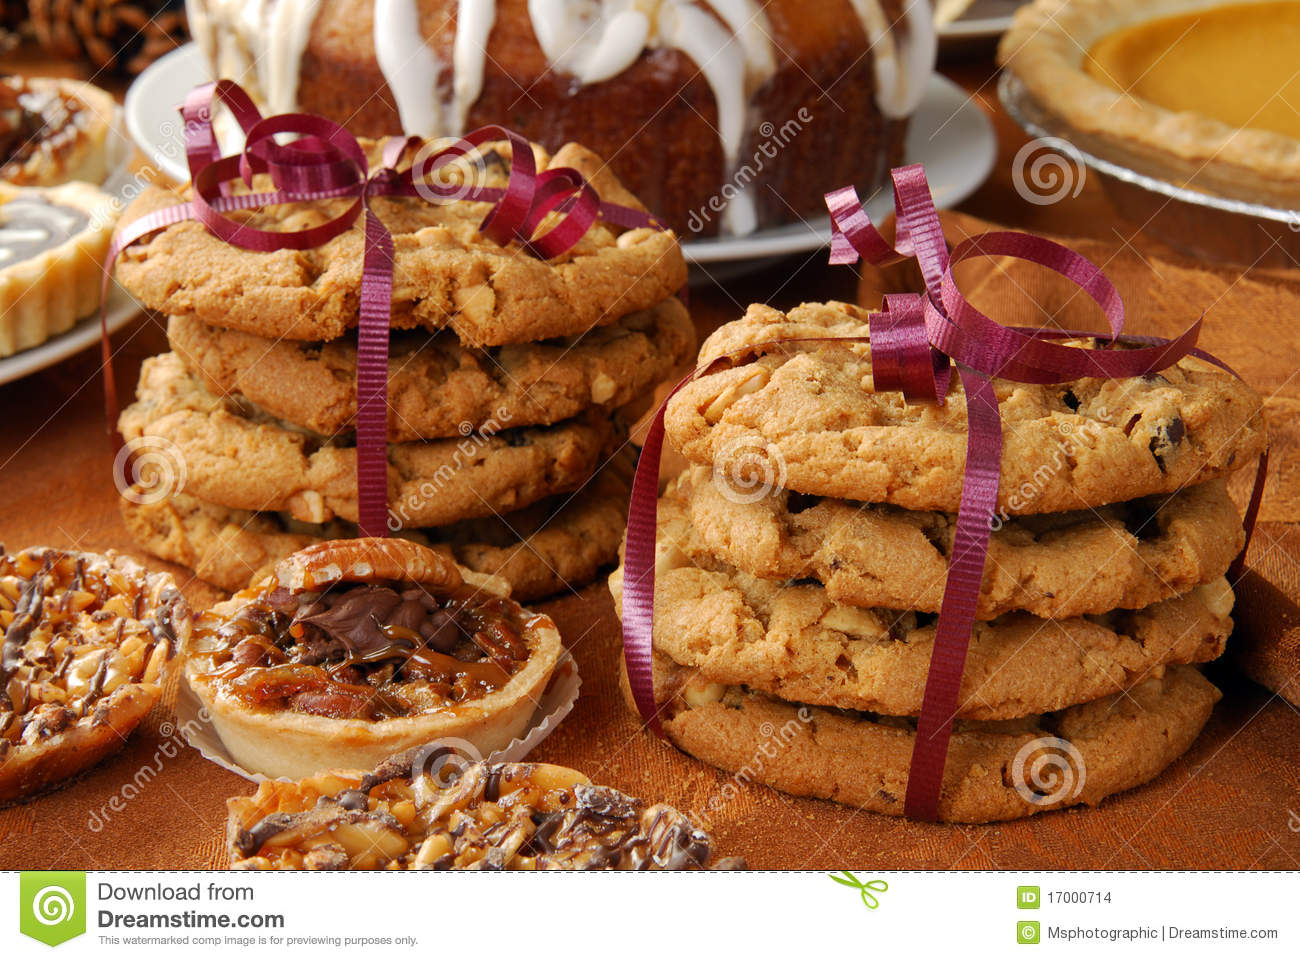 Holiday Dessert Buffet Stock Images   Image  17000714